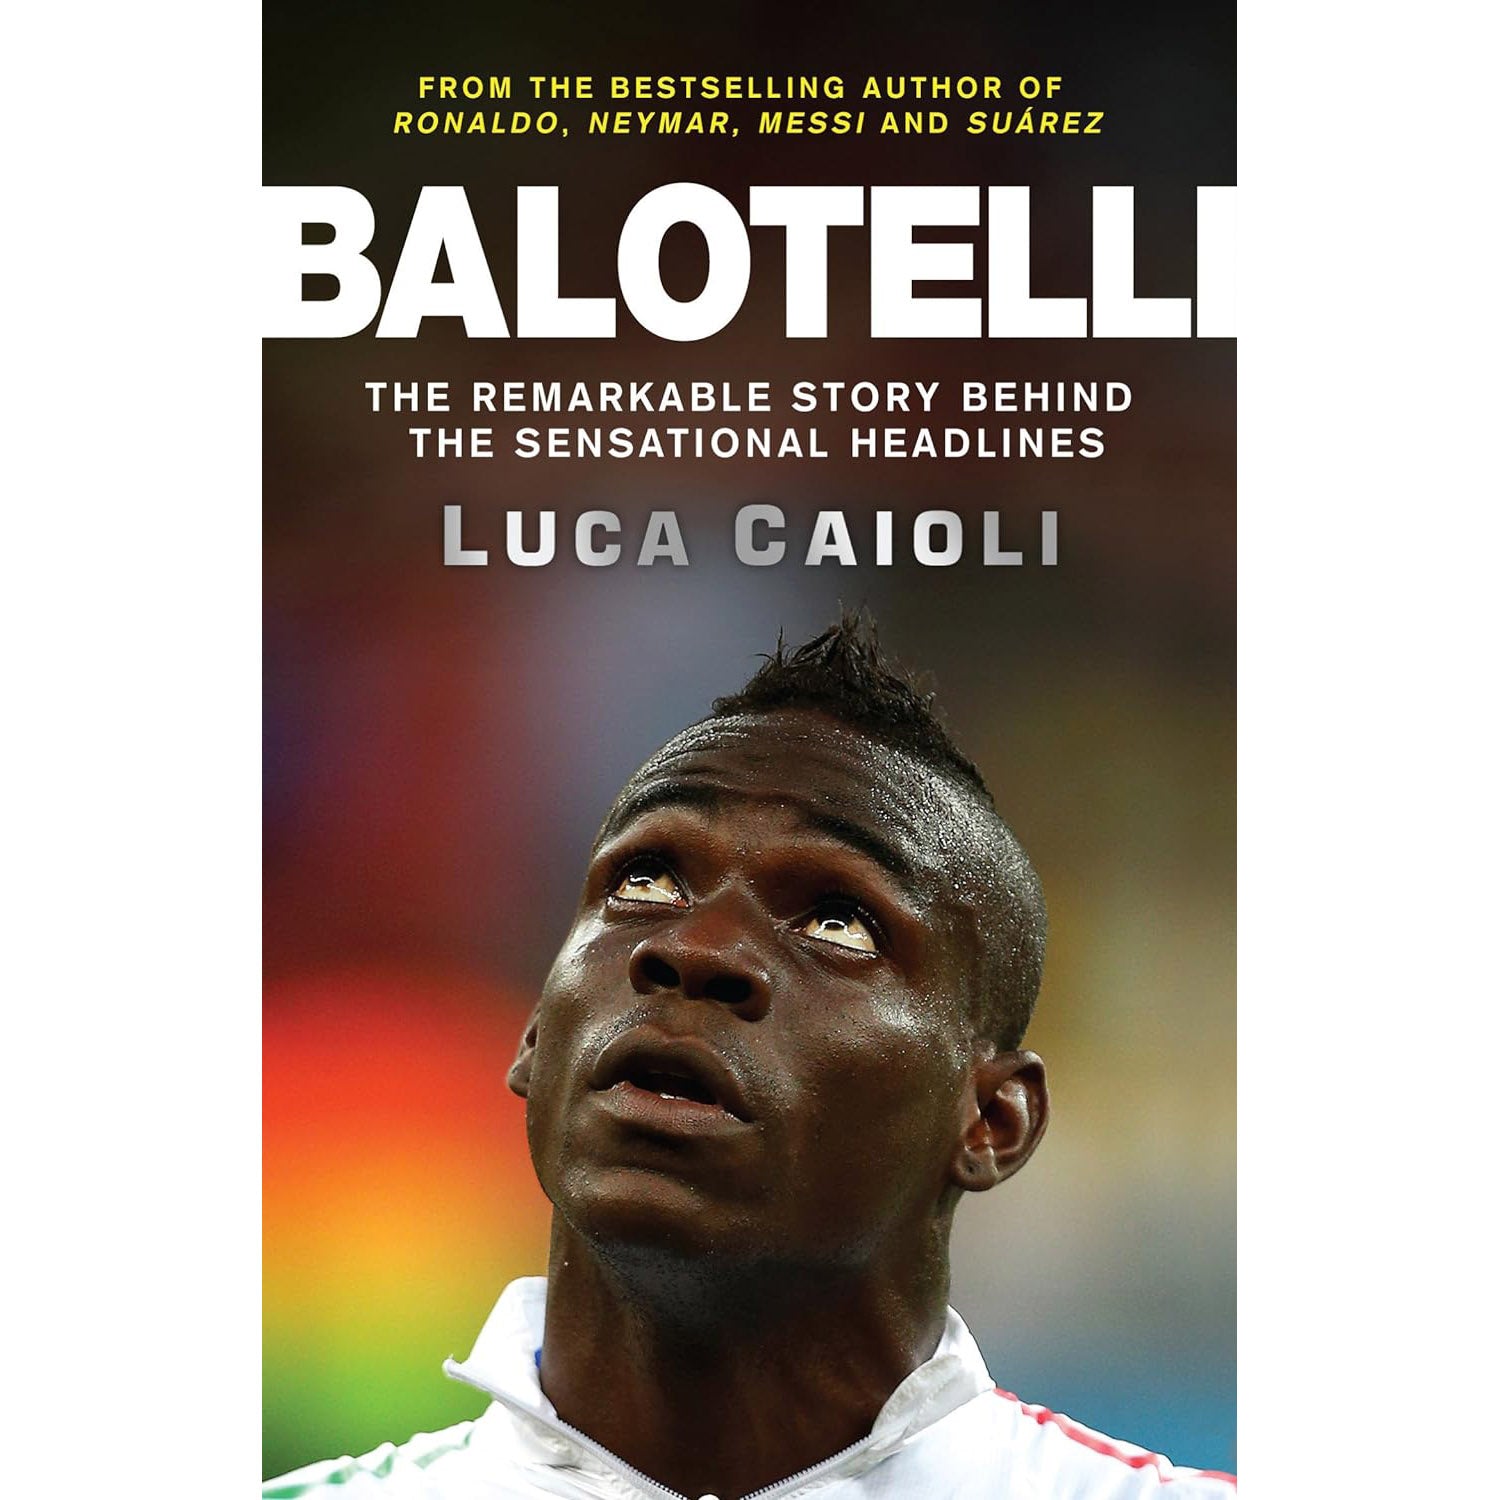 Balotelli – The Remarkable Story Behind the Sensational Headlines